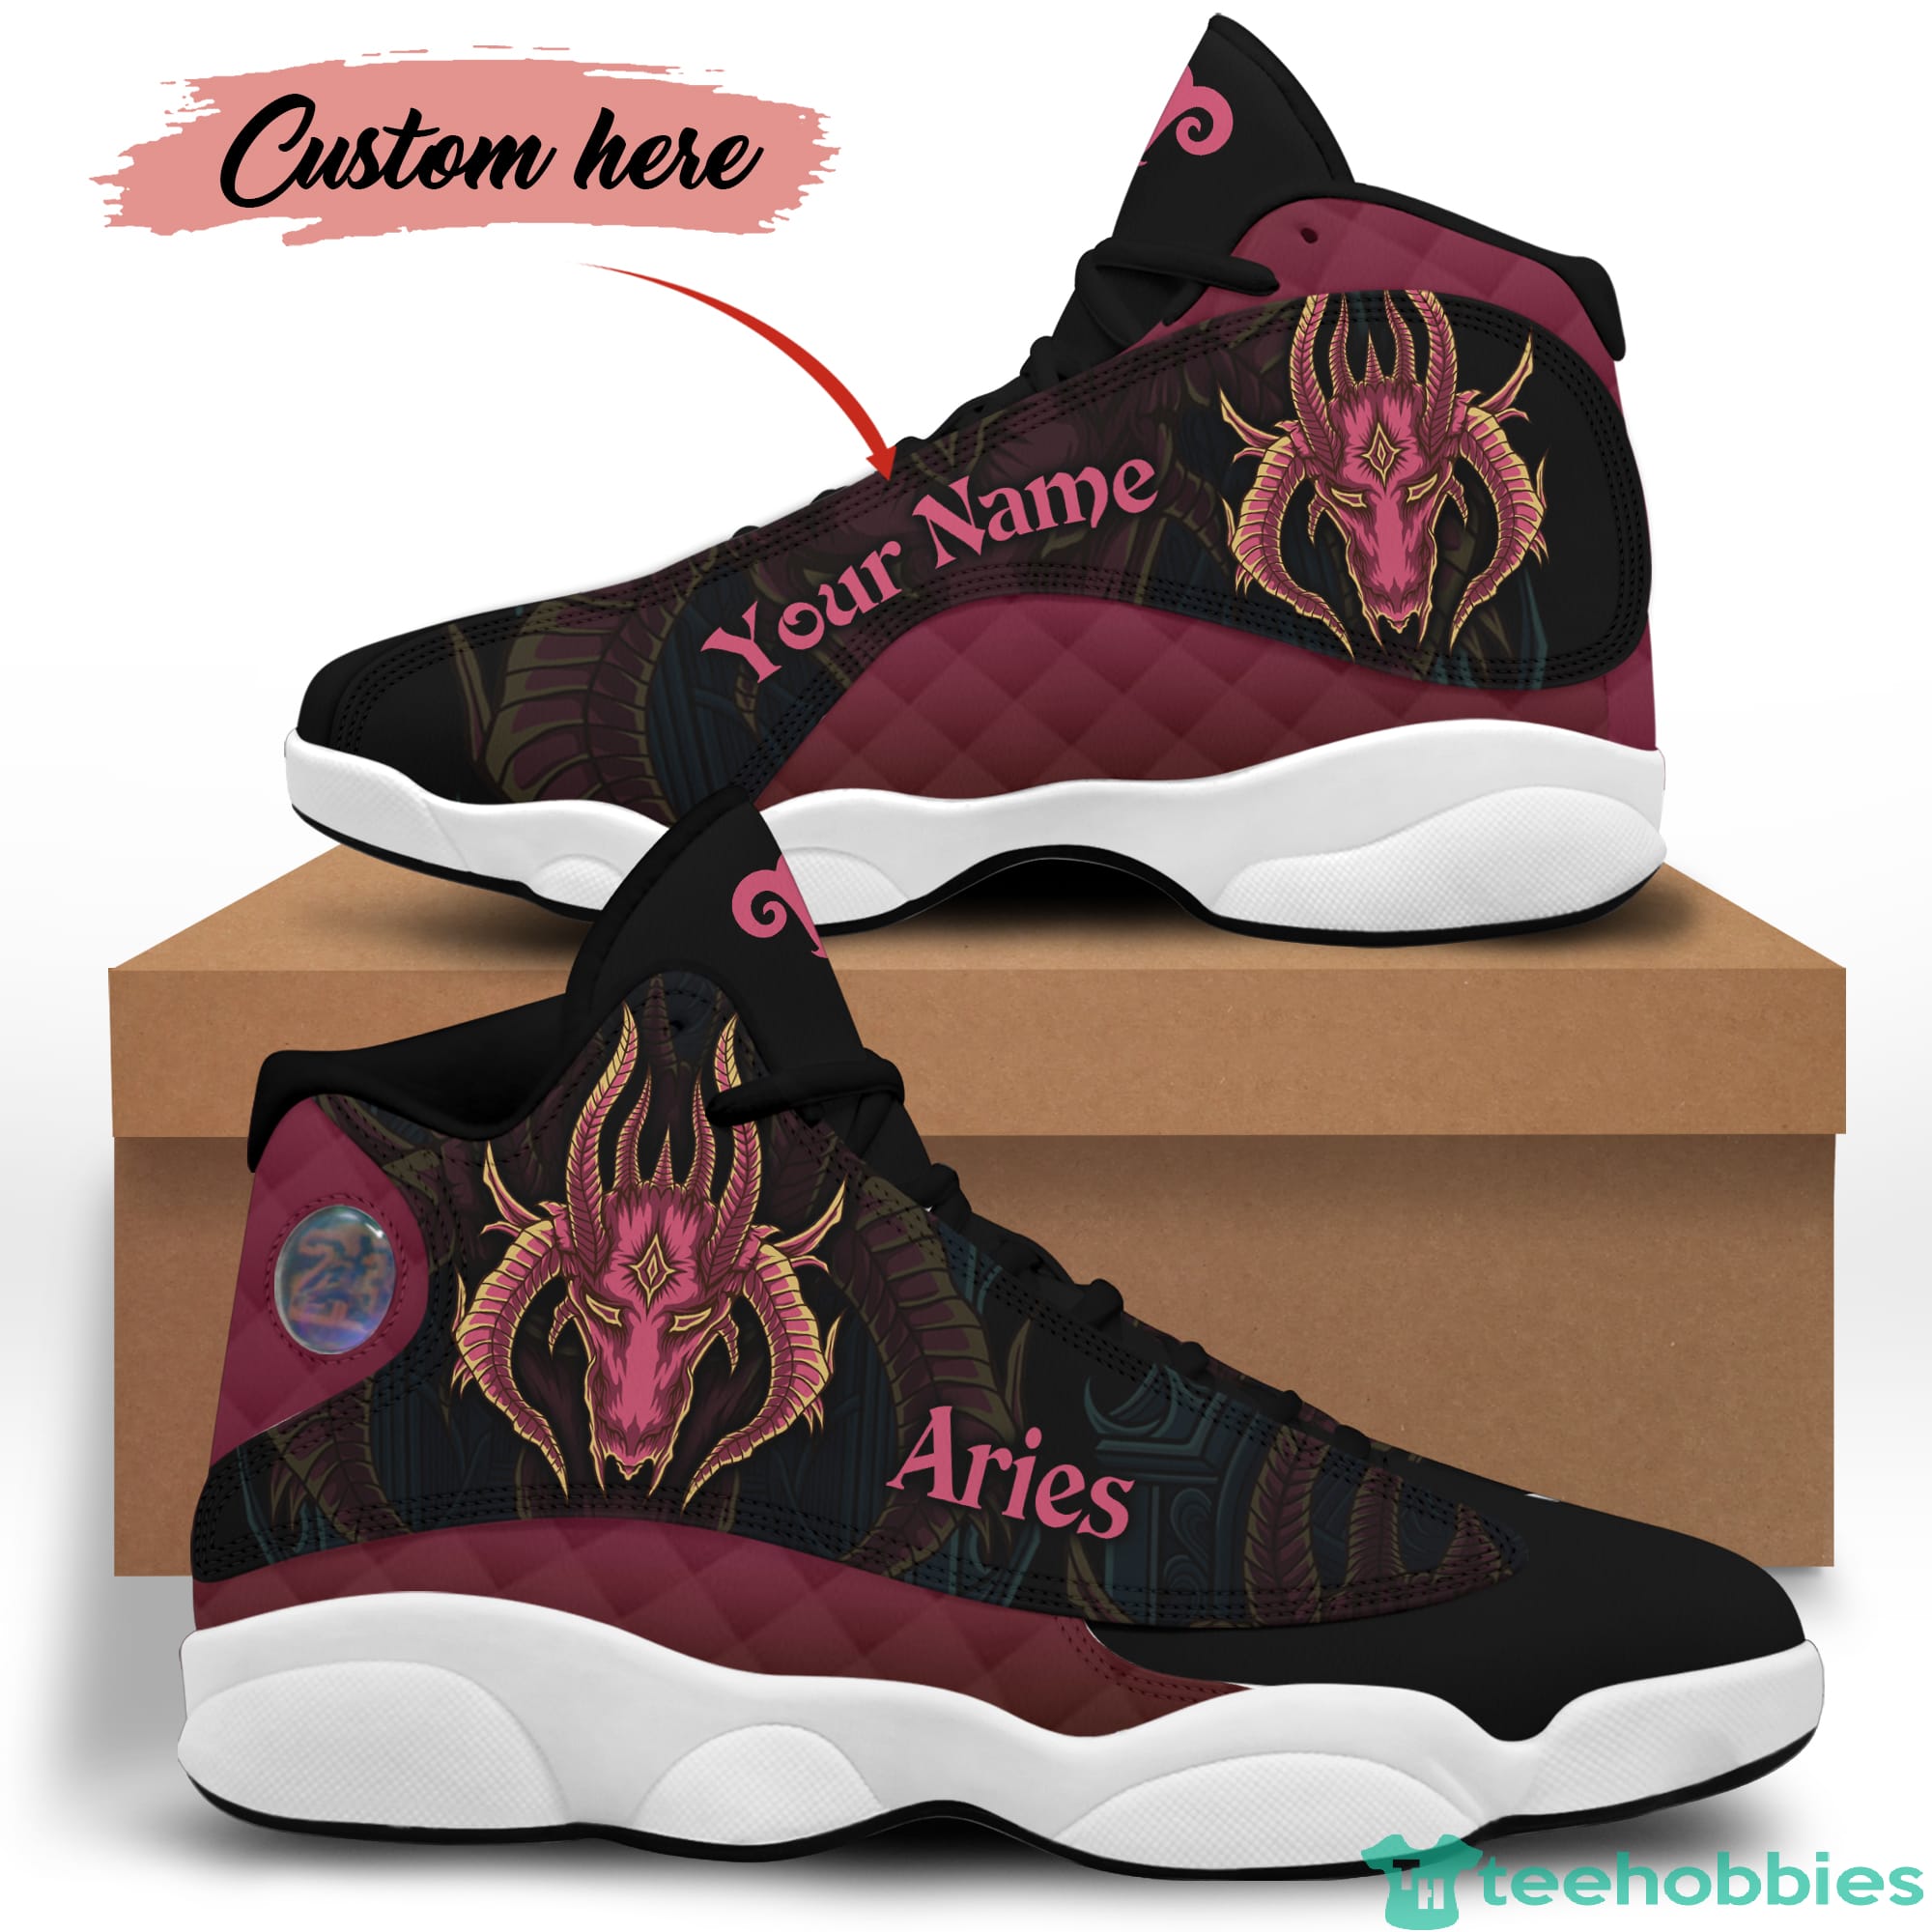 Aries Birthday Gift Personalized Name Personalized Name Air Jordan 13 Shoes SKU-247